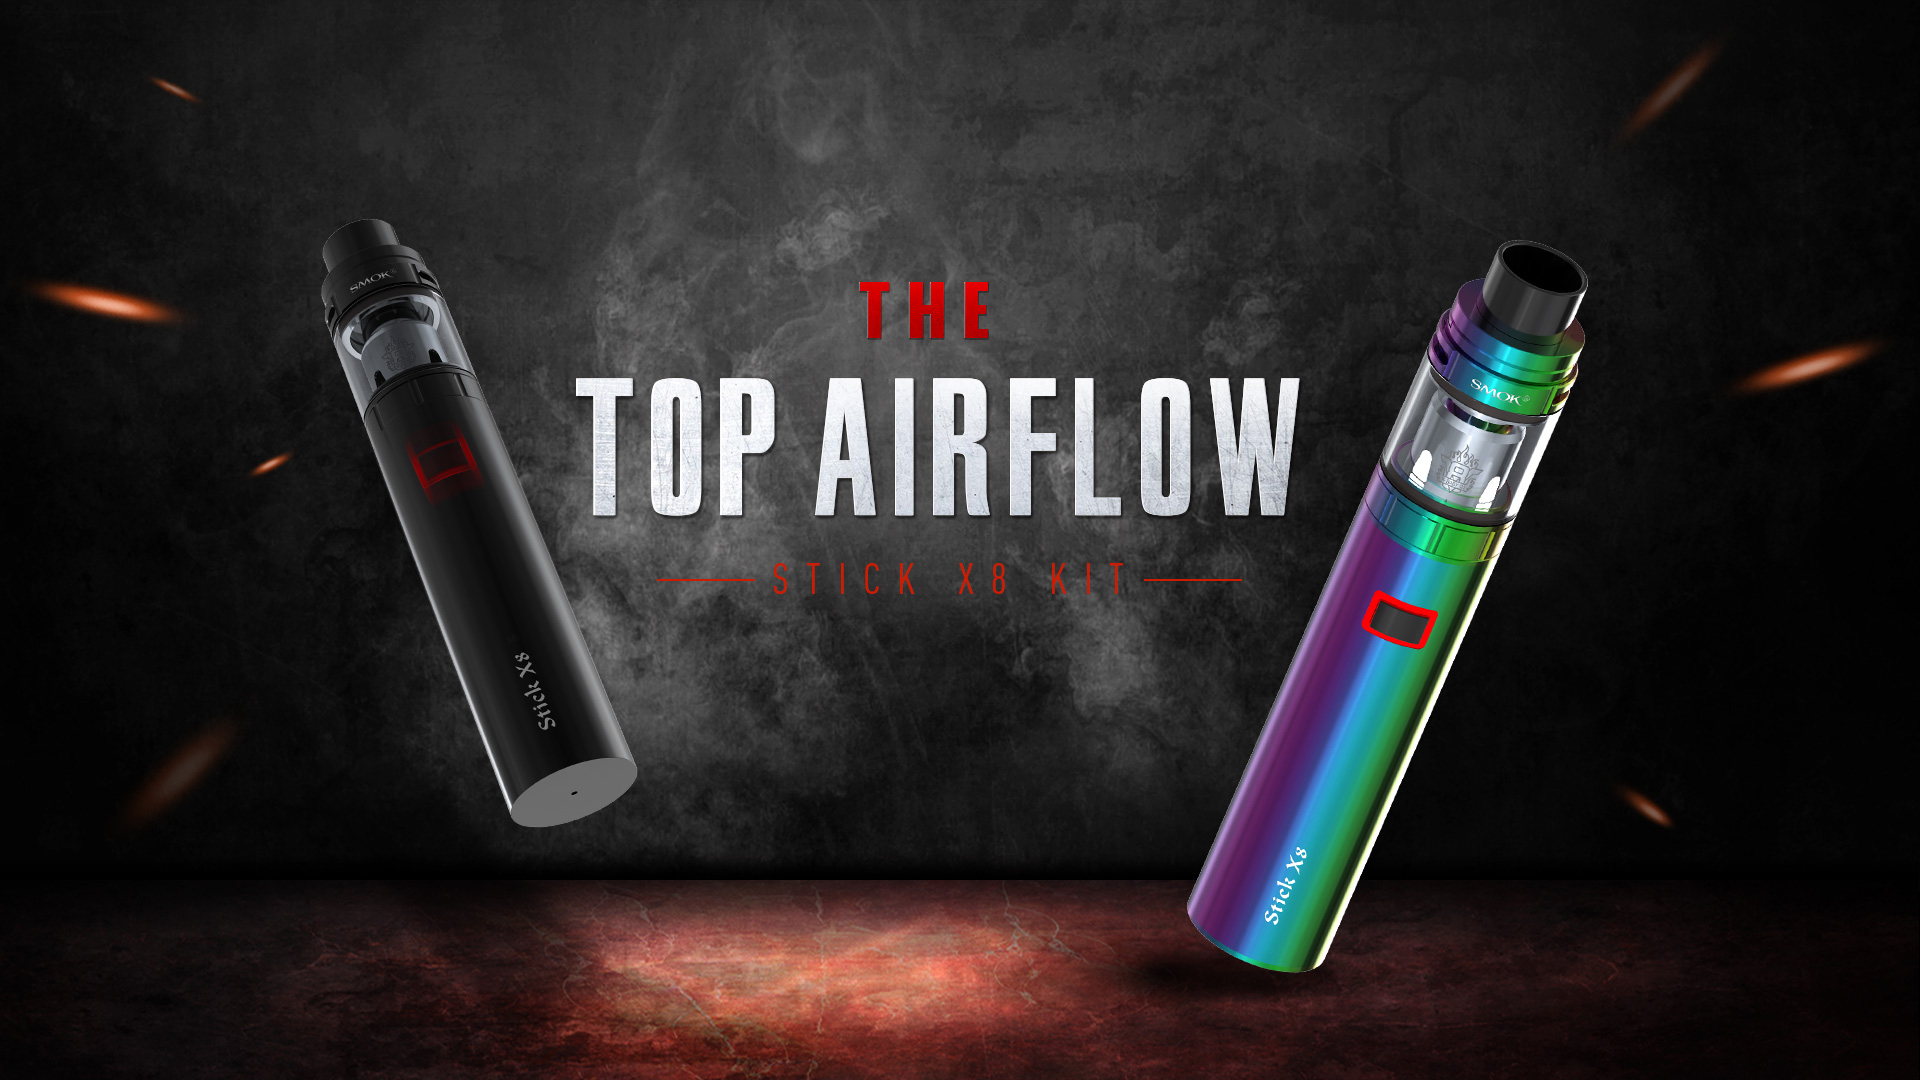 The Top Airflow Feature of SMOK Stick X8 Kit